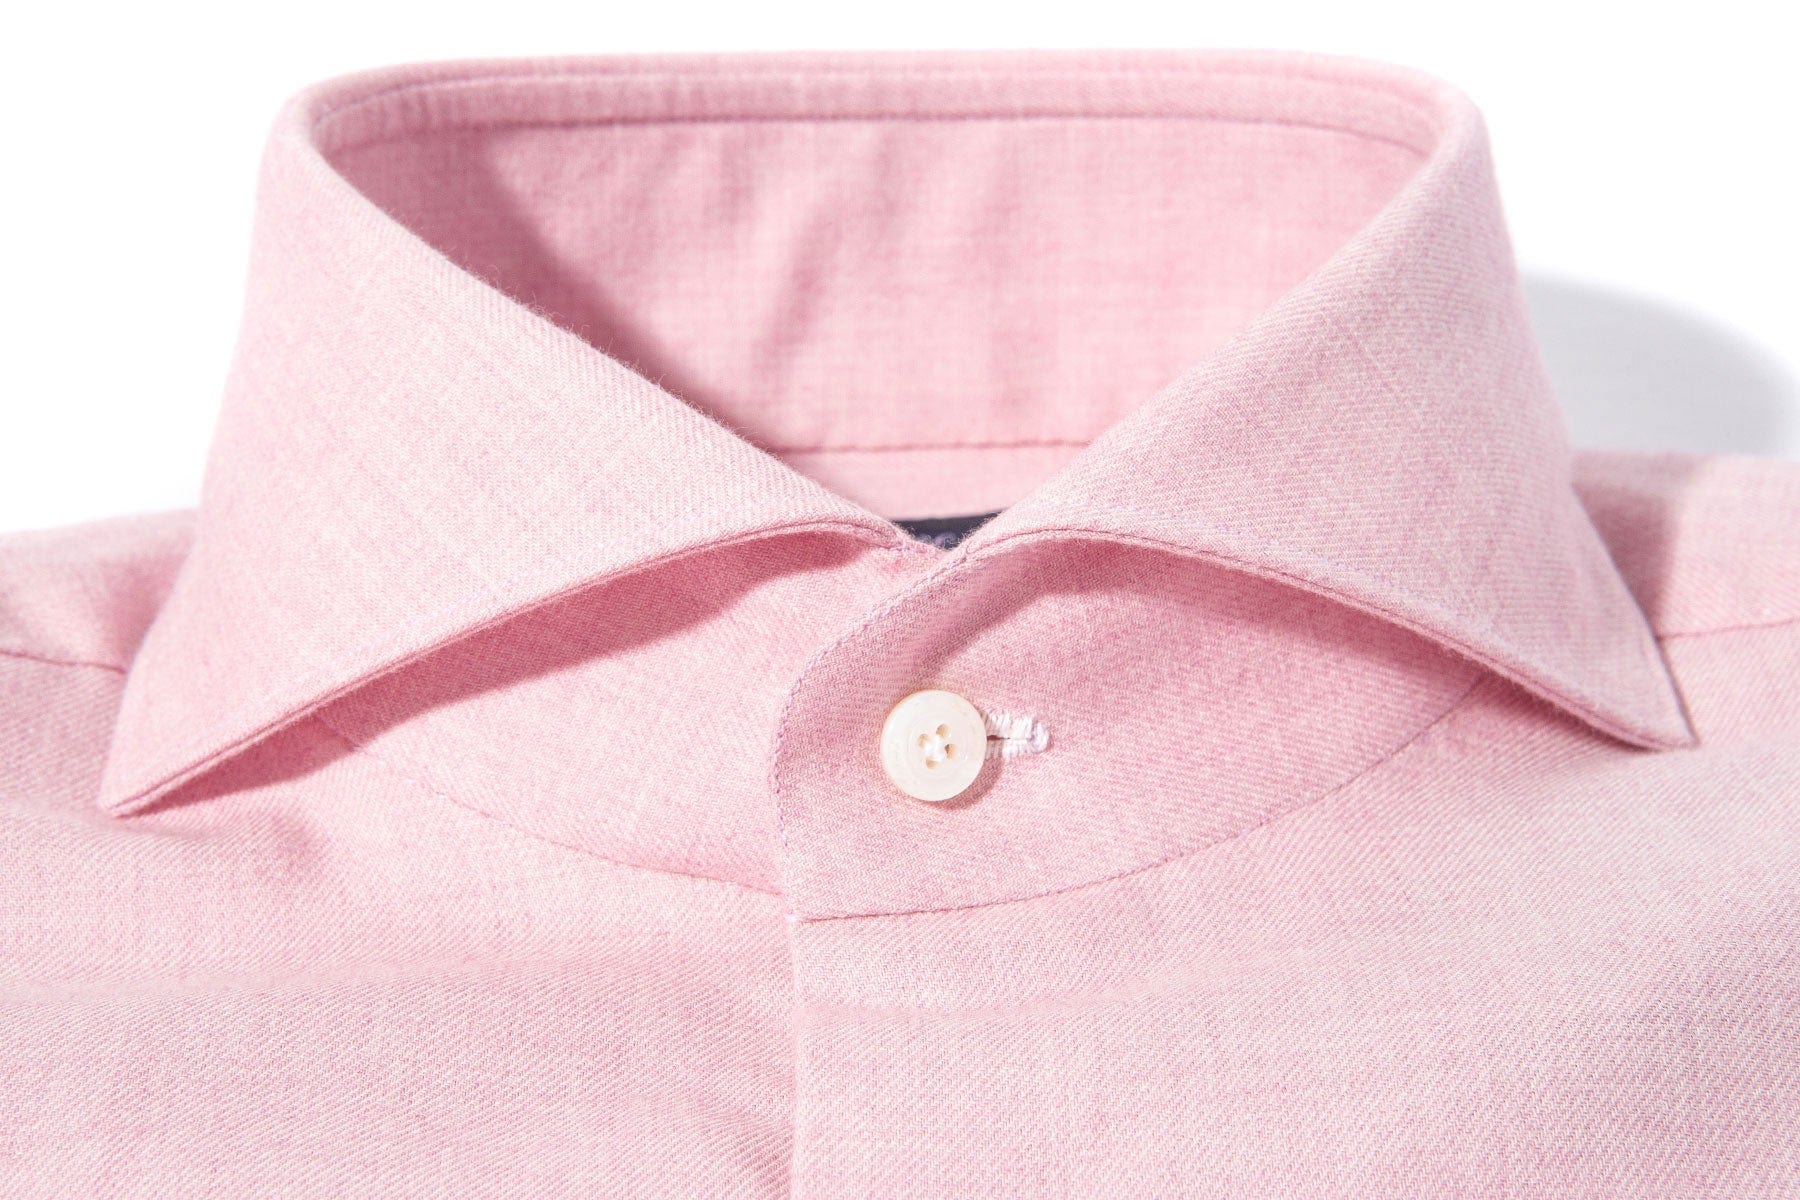 Hemme Cotton Shirt in Pink - AXEL'S